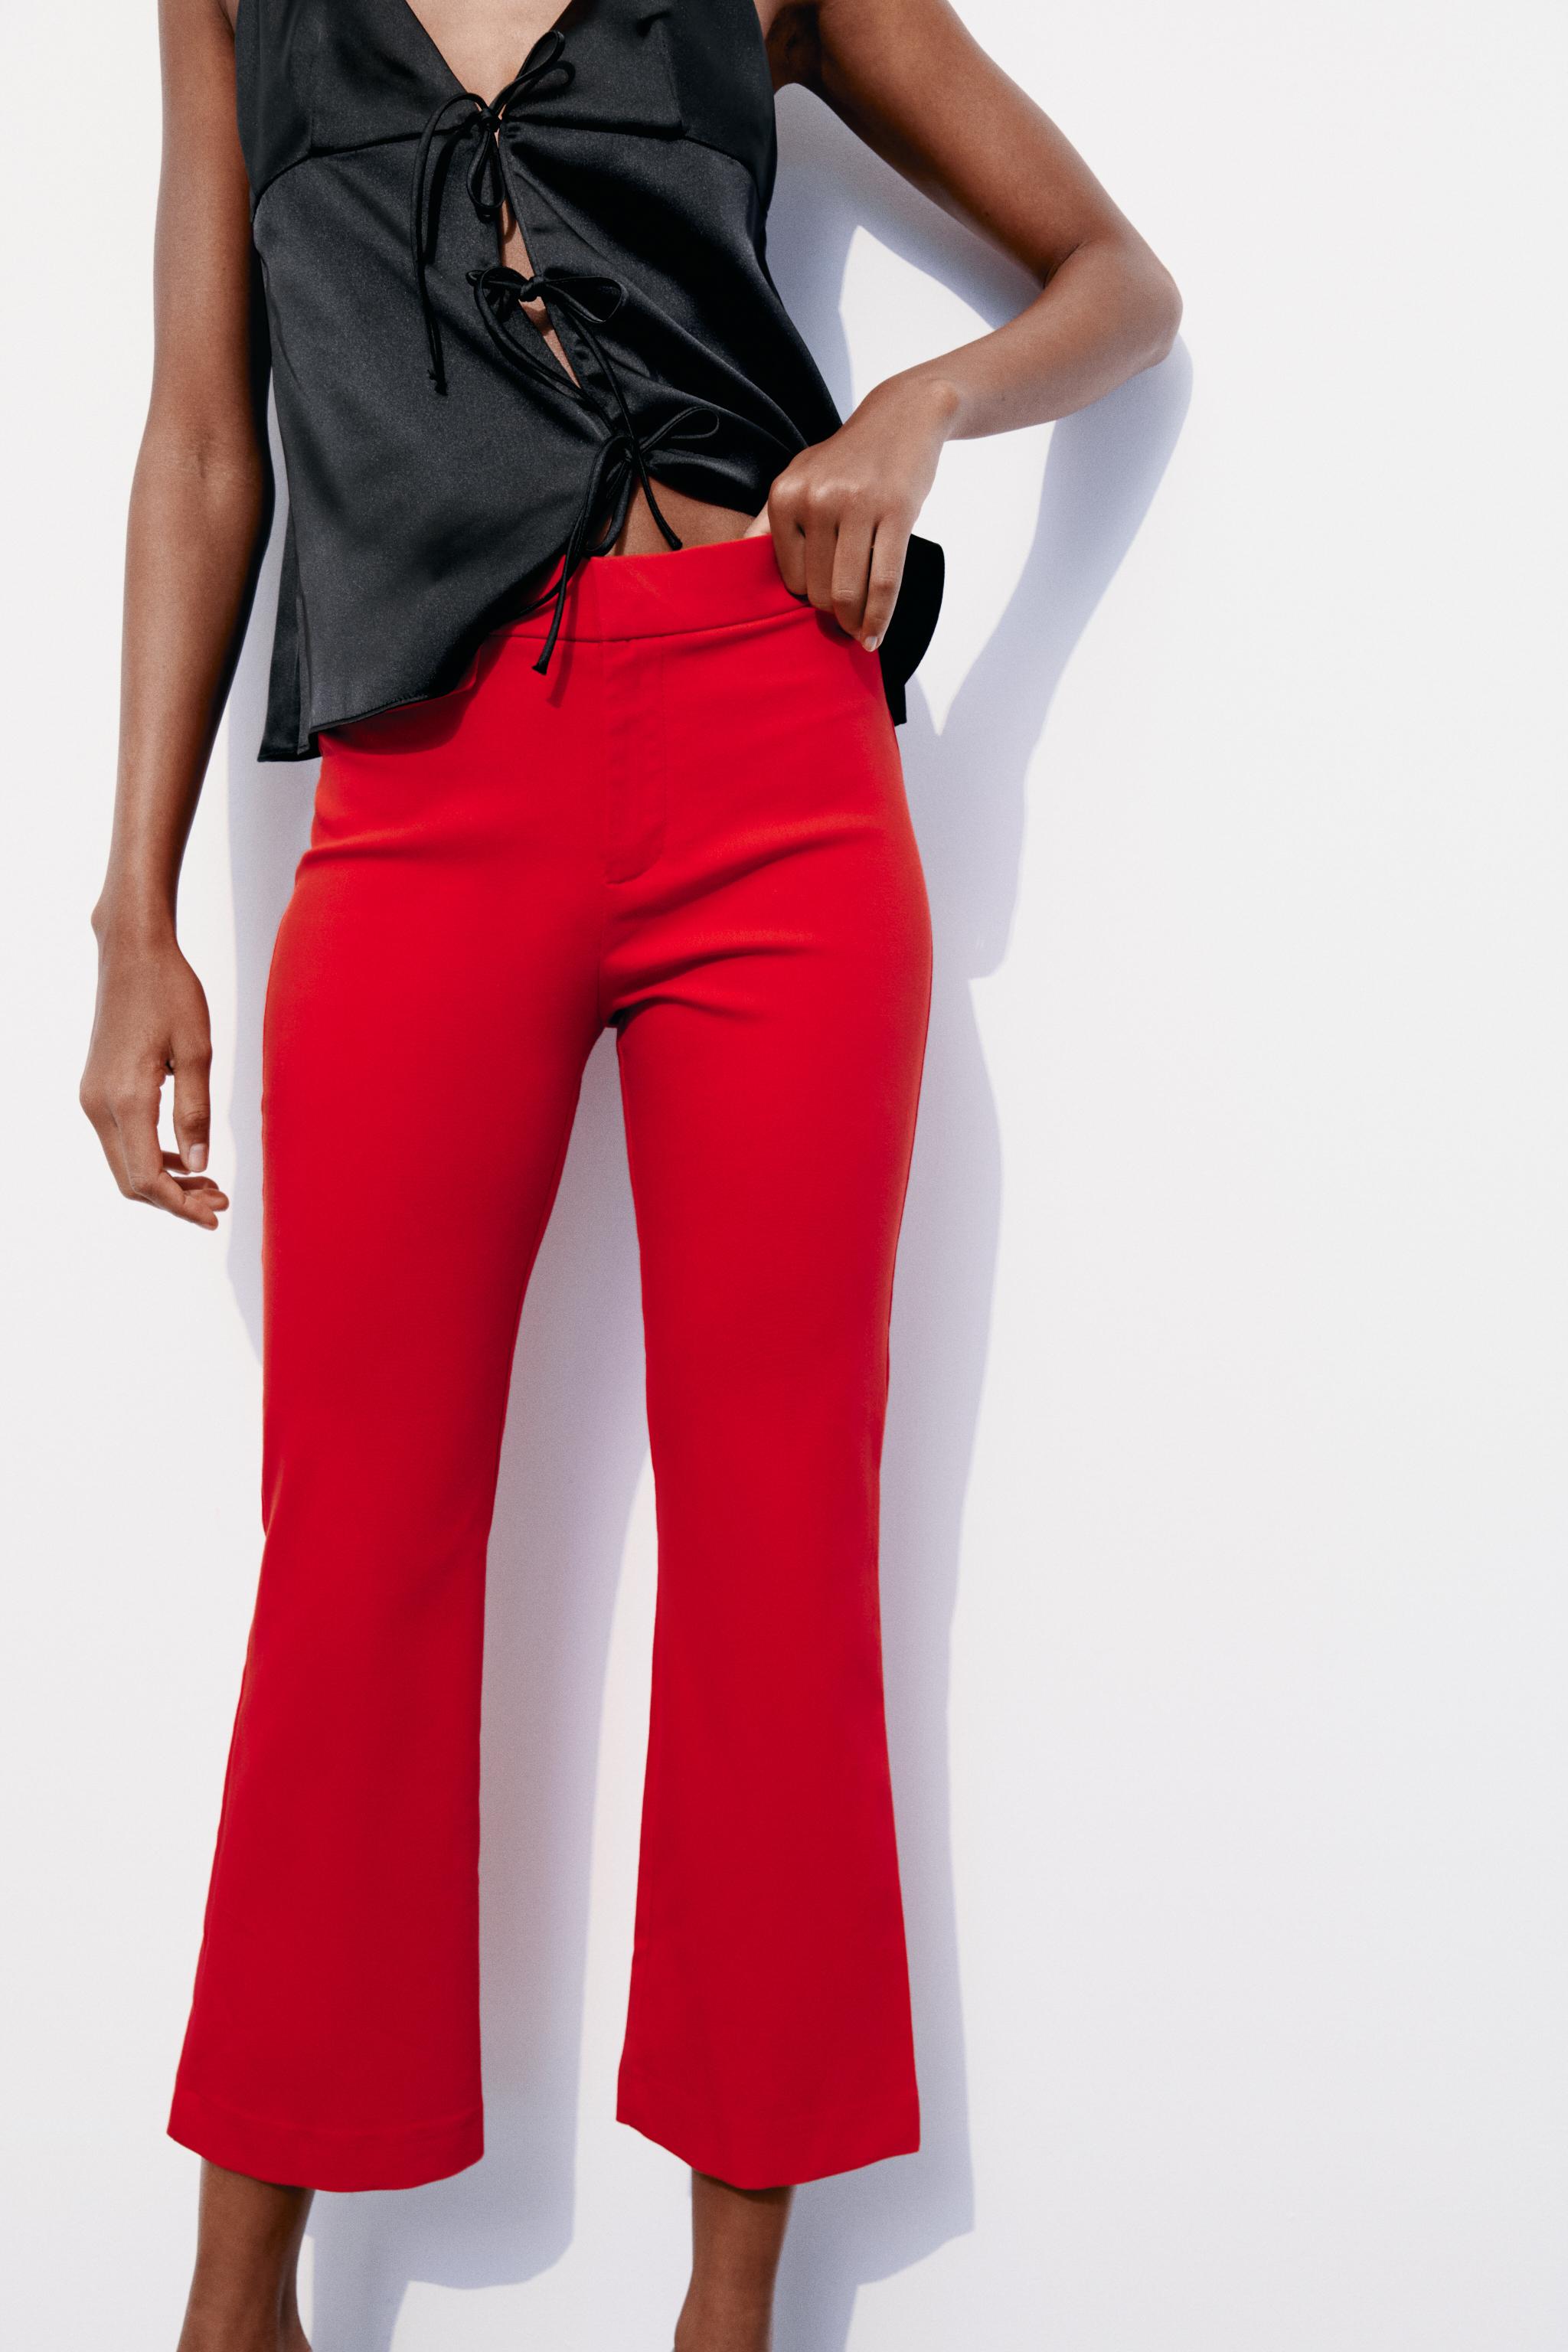 Women's Red Trousers & Pants